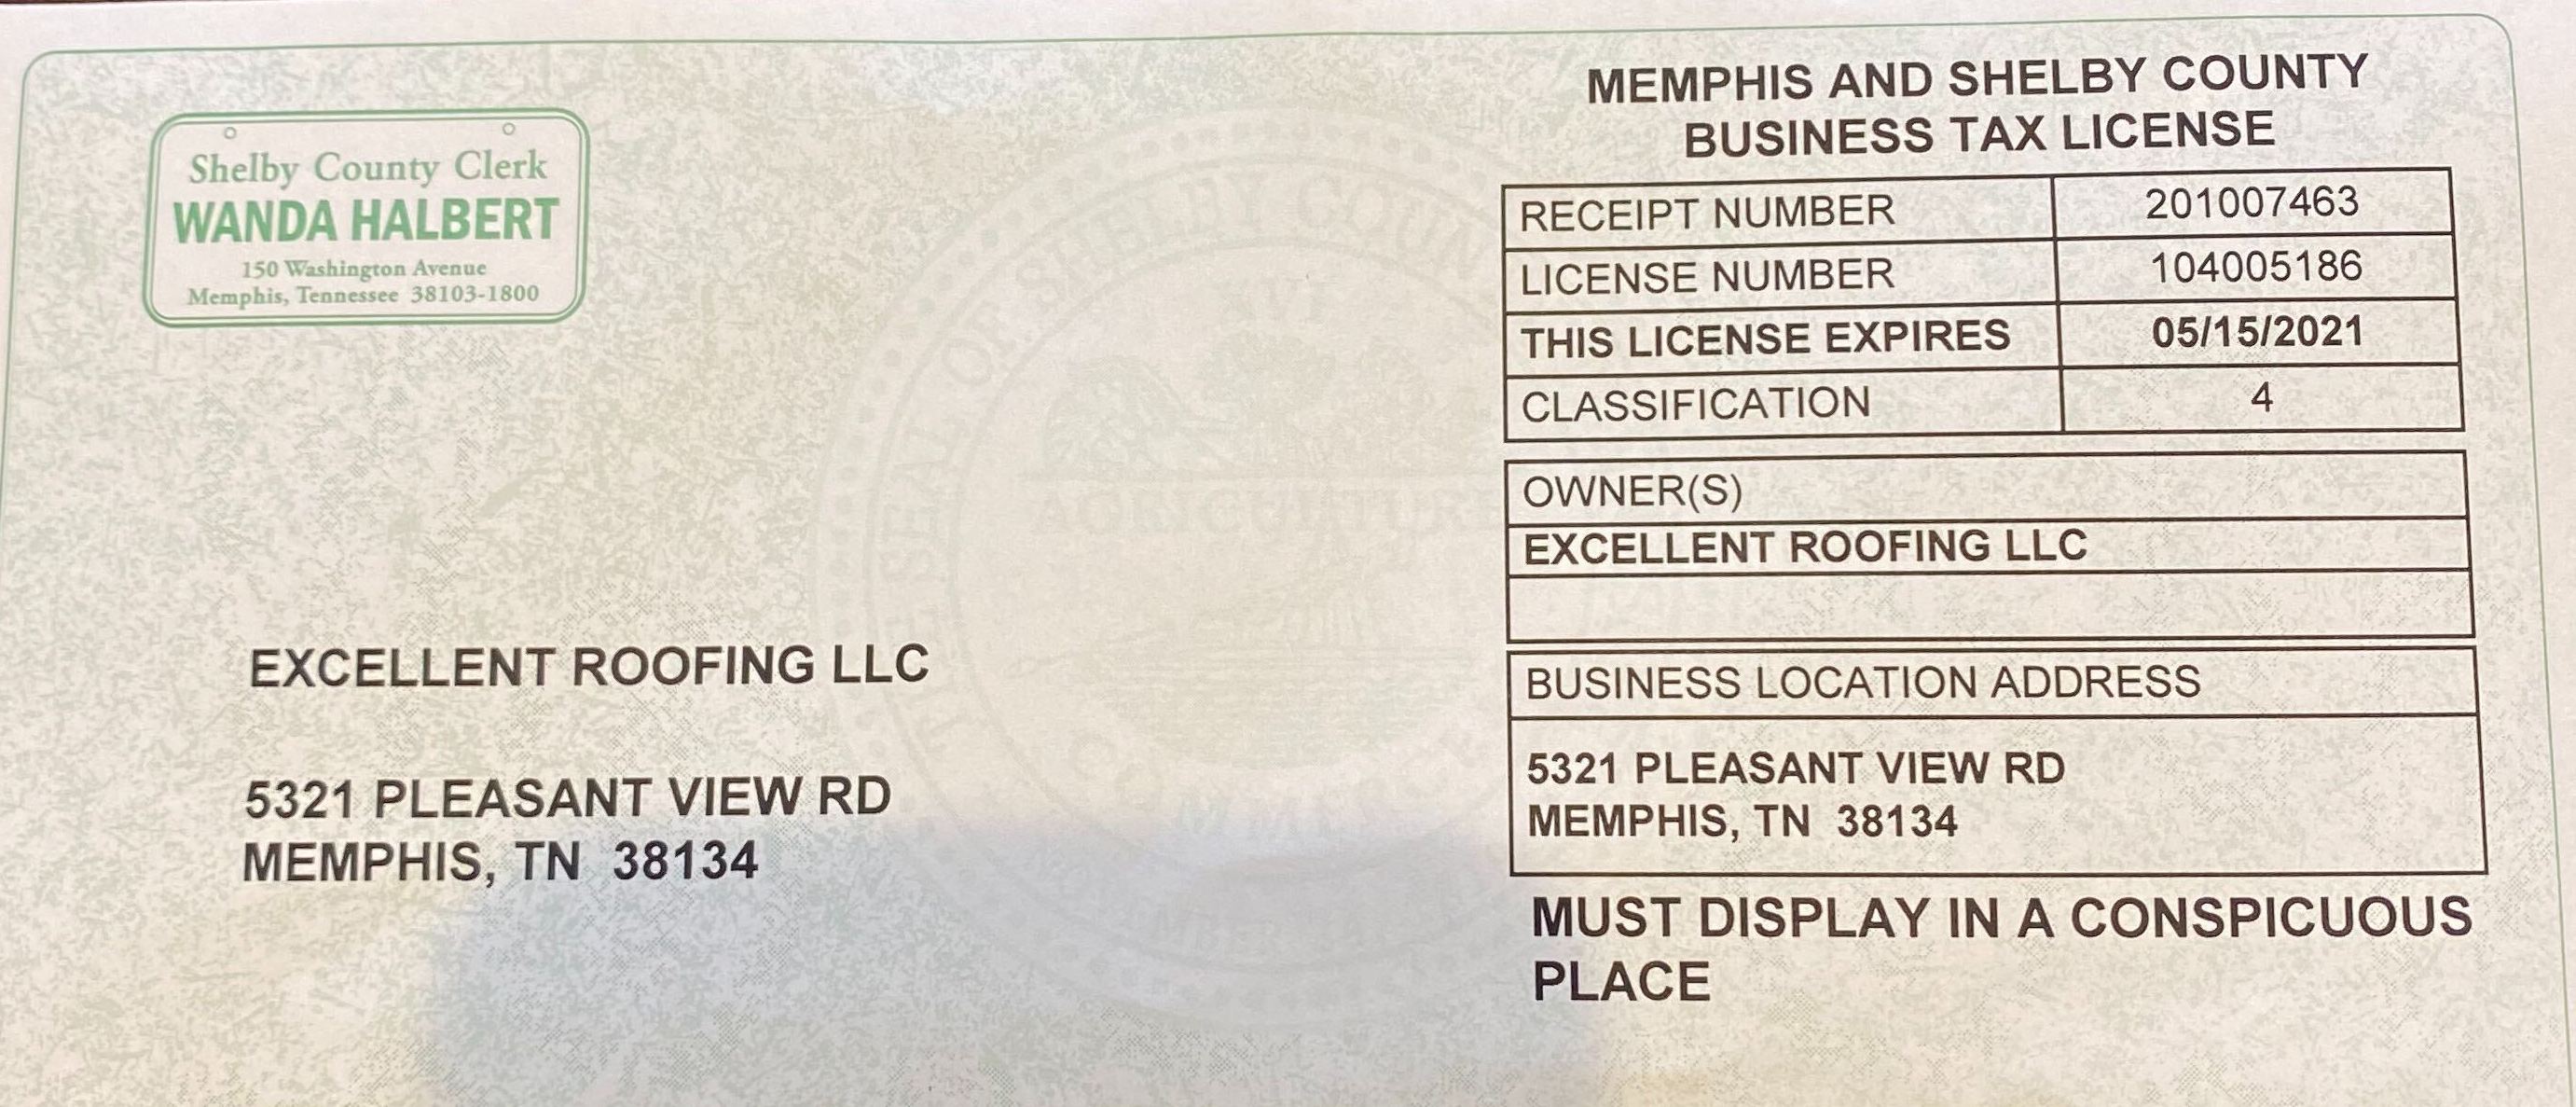 Memphis And Shelby County Business Tax License